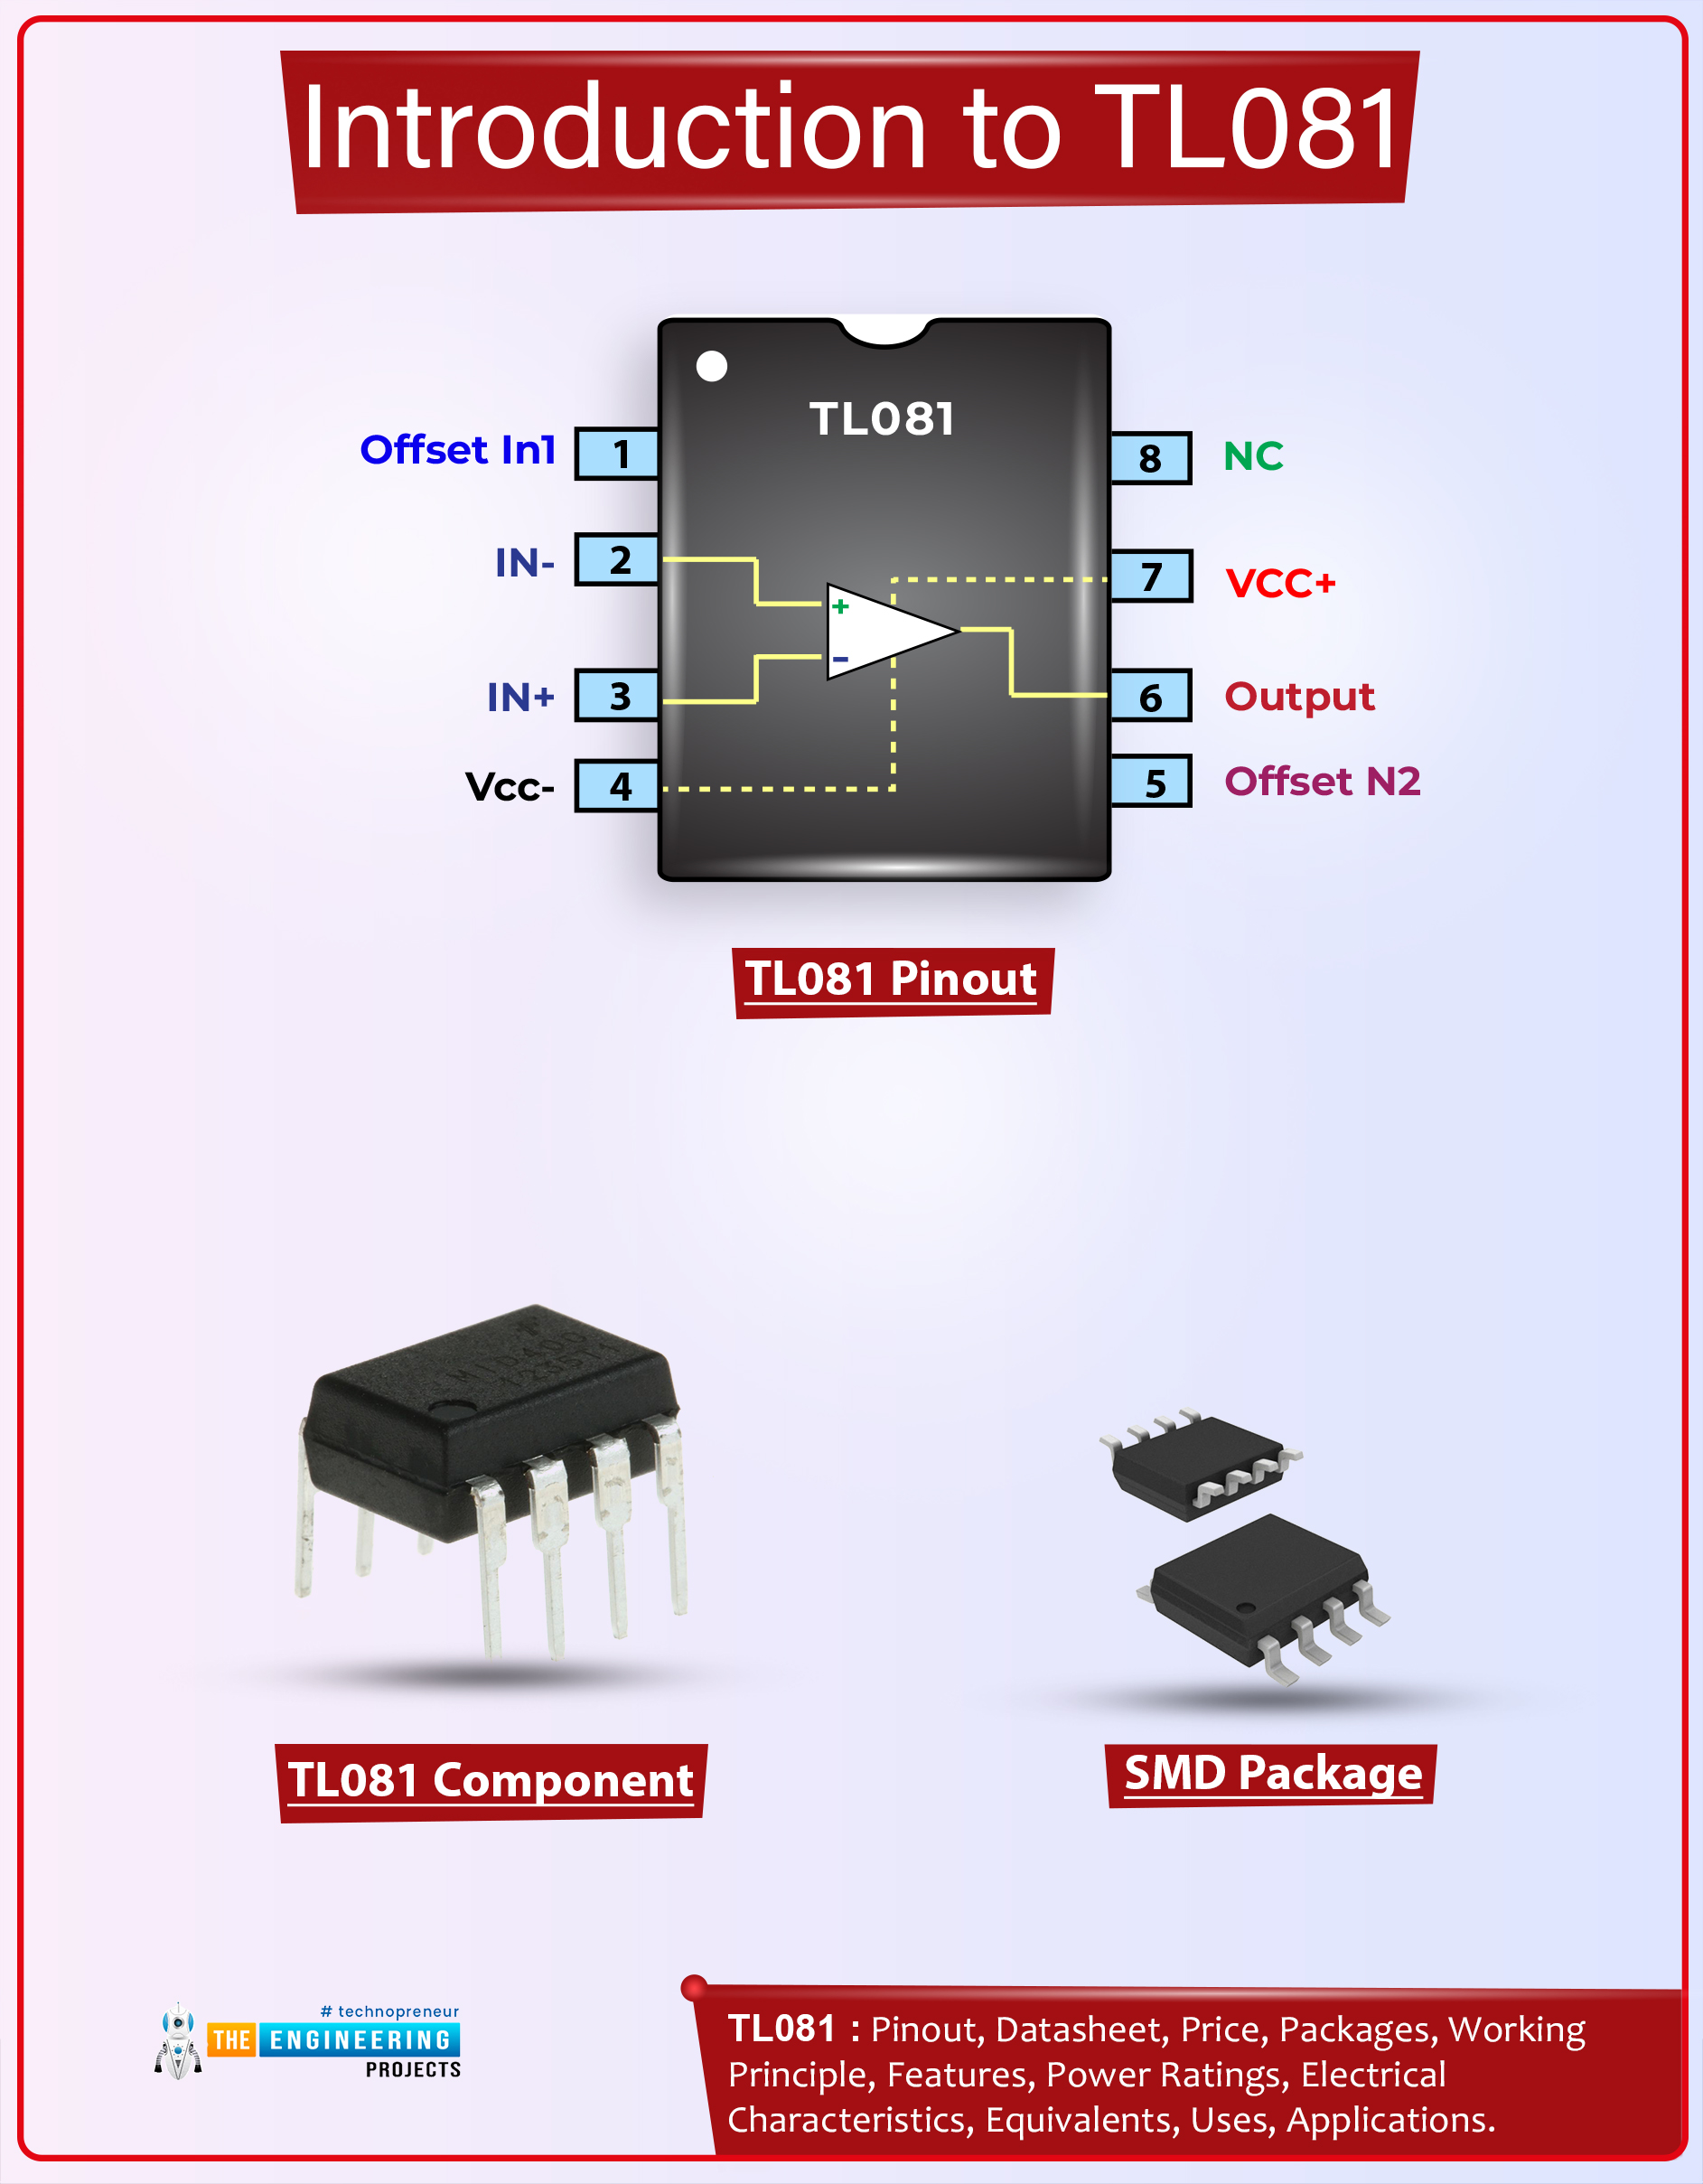 Introduction to tl081, tl081 pinout, tl081 power ratings, tl081 applications